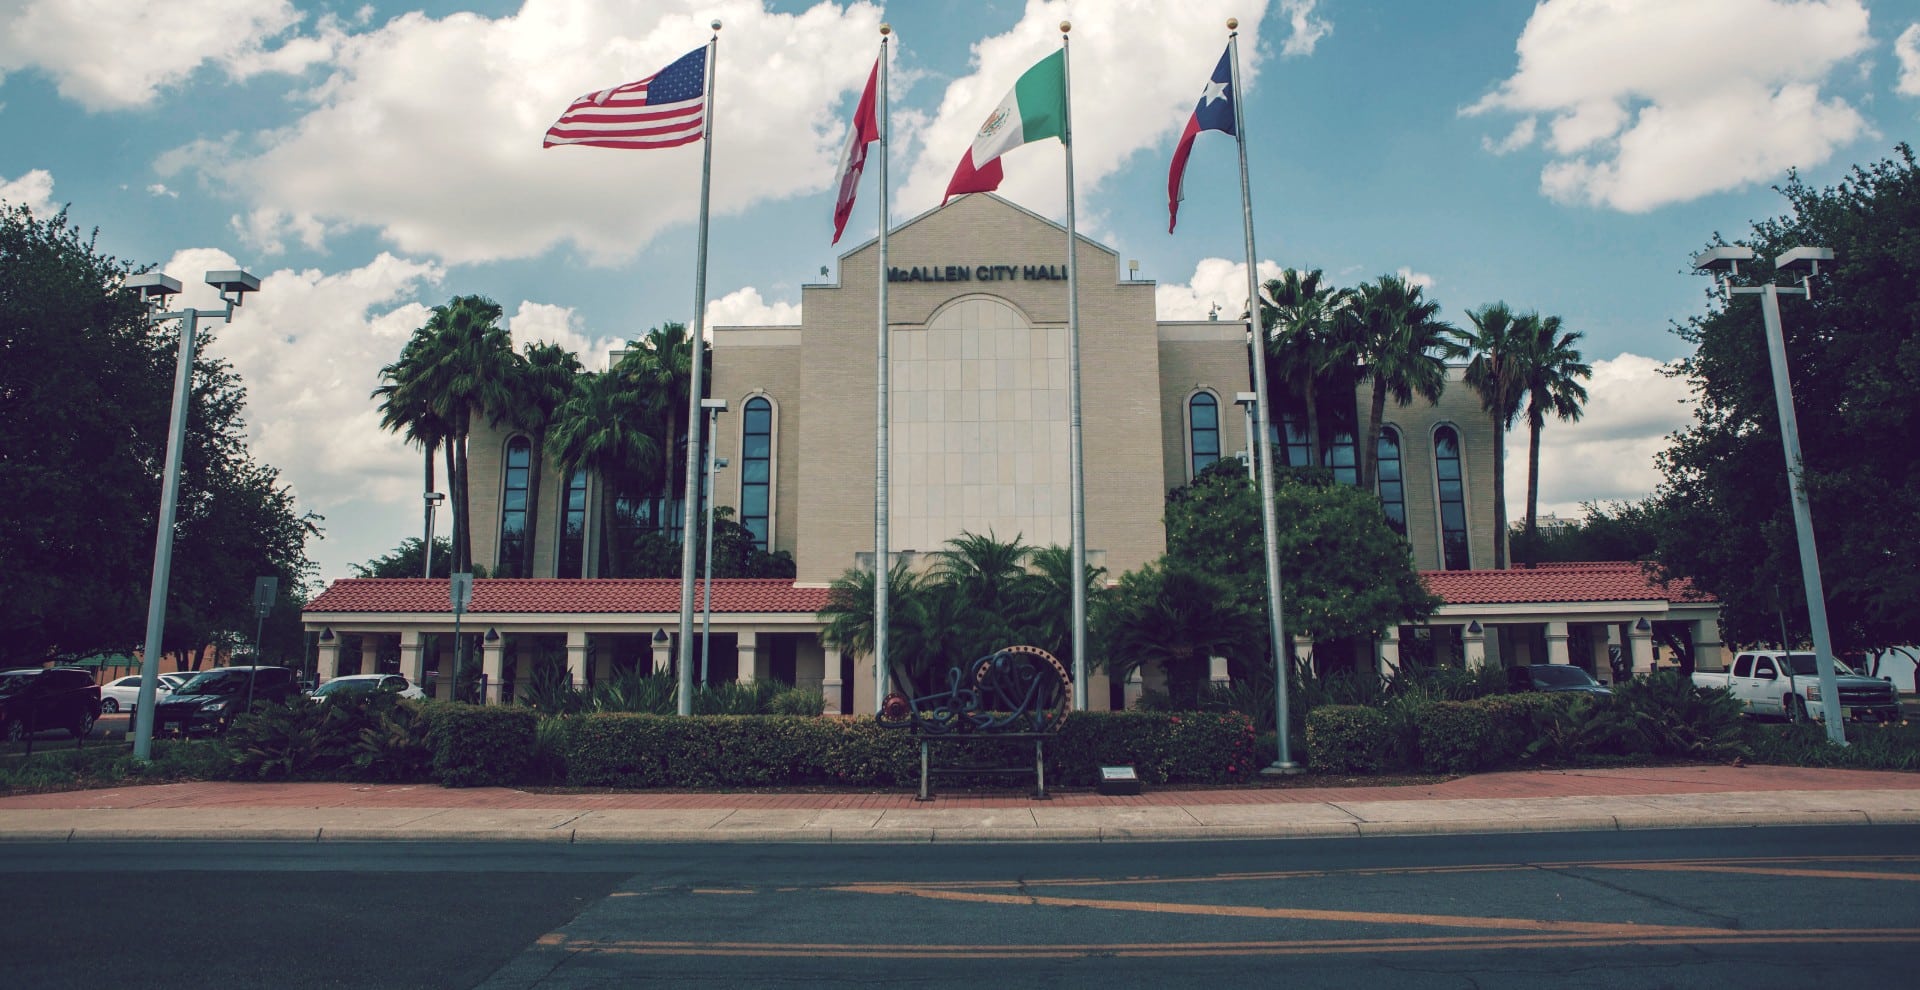 The Best Areas to Stay in McAllen, TX